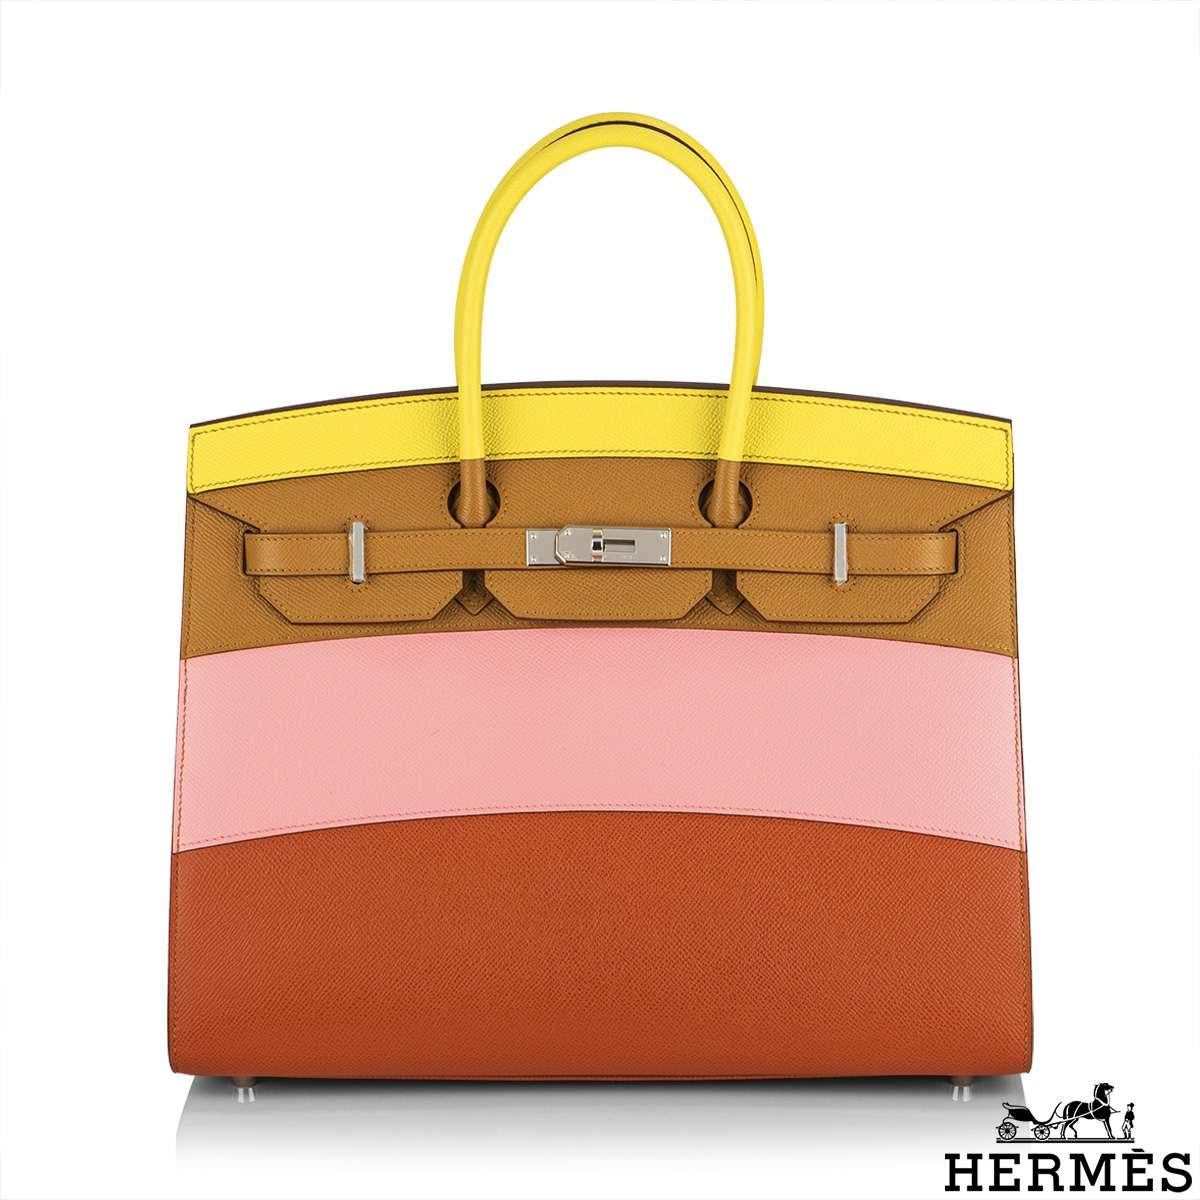 A Rare Limited Edition Hermès Sellier Birkin 35cm Rainbow Sunrise bag. The exterior of this Birkin features Epsom leather in yellow lime, sésame beige, rose confetti, and brown terre. These sunrise-inspired colours are complemented with palladium